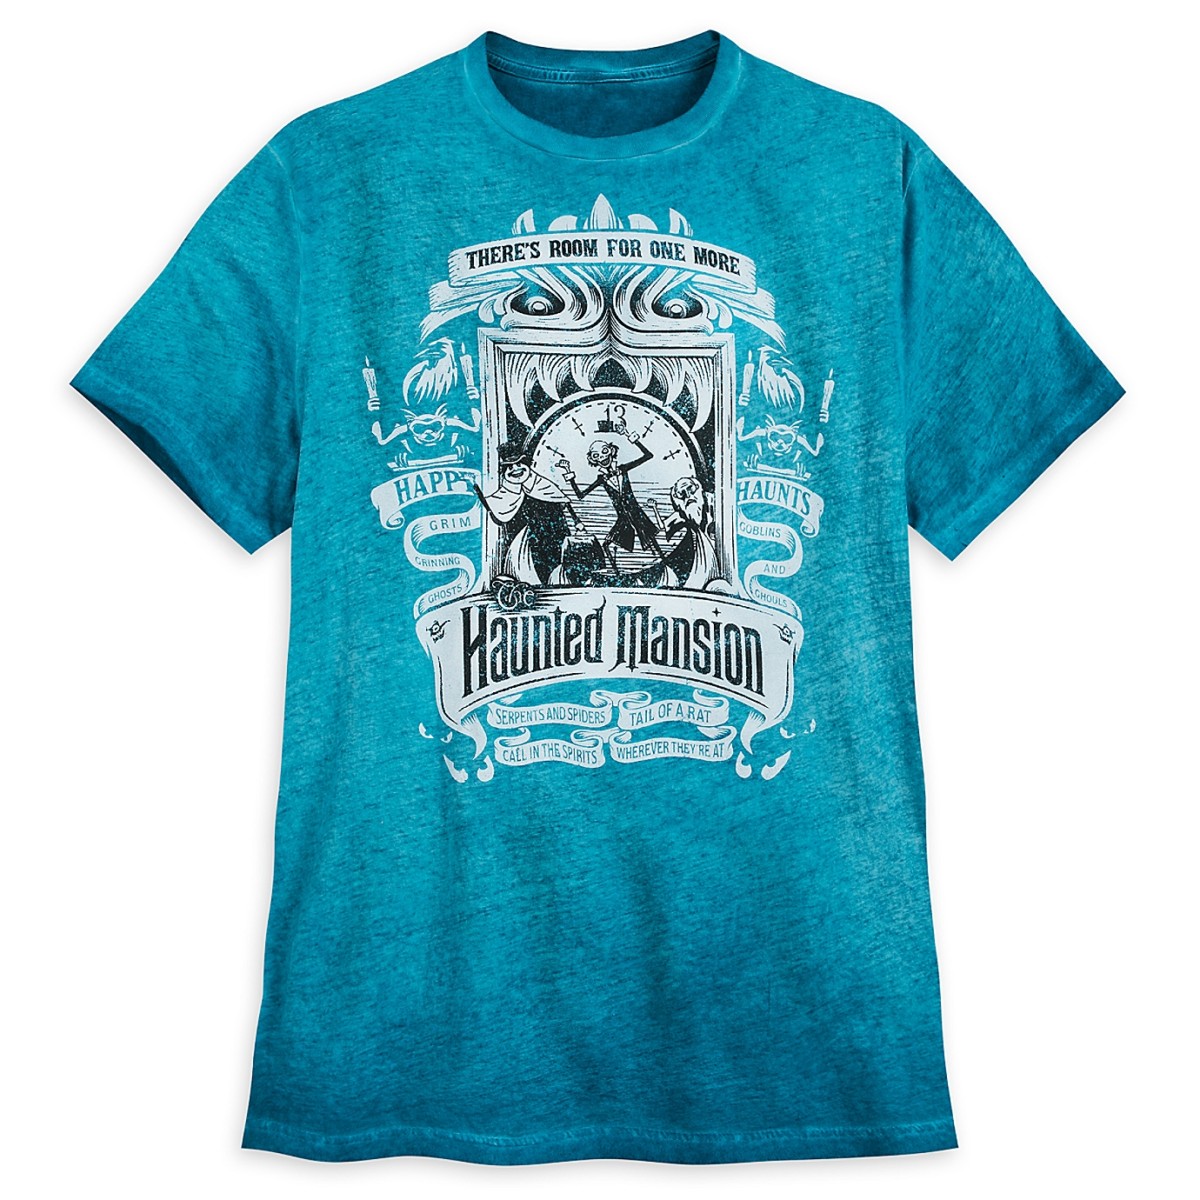 SHOP New Haunted Mansion 50th Anniversary Merchandise Materializes on